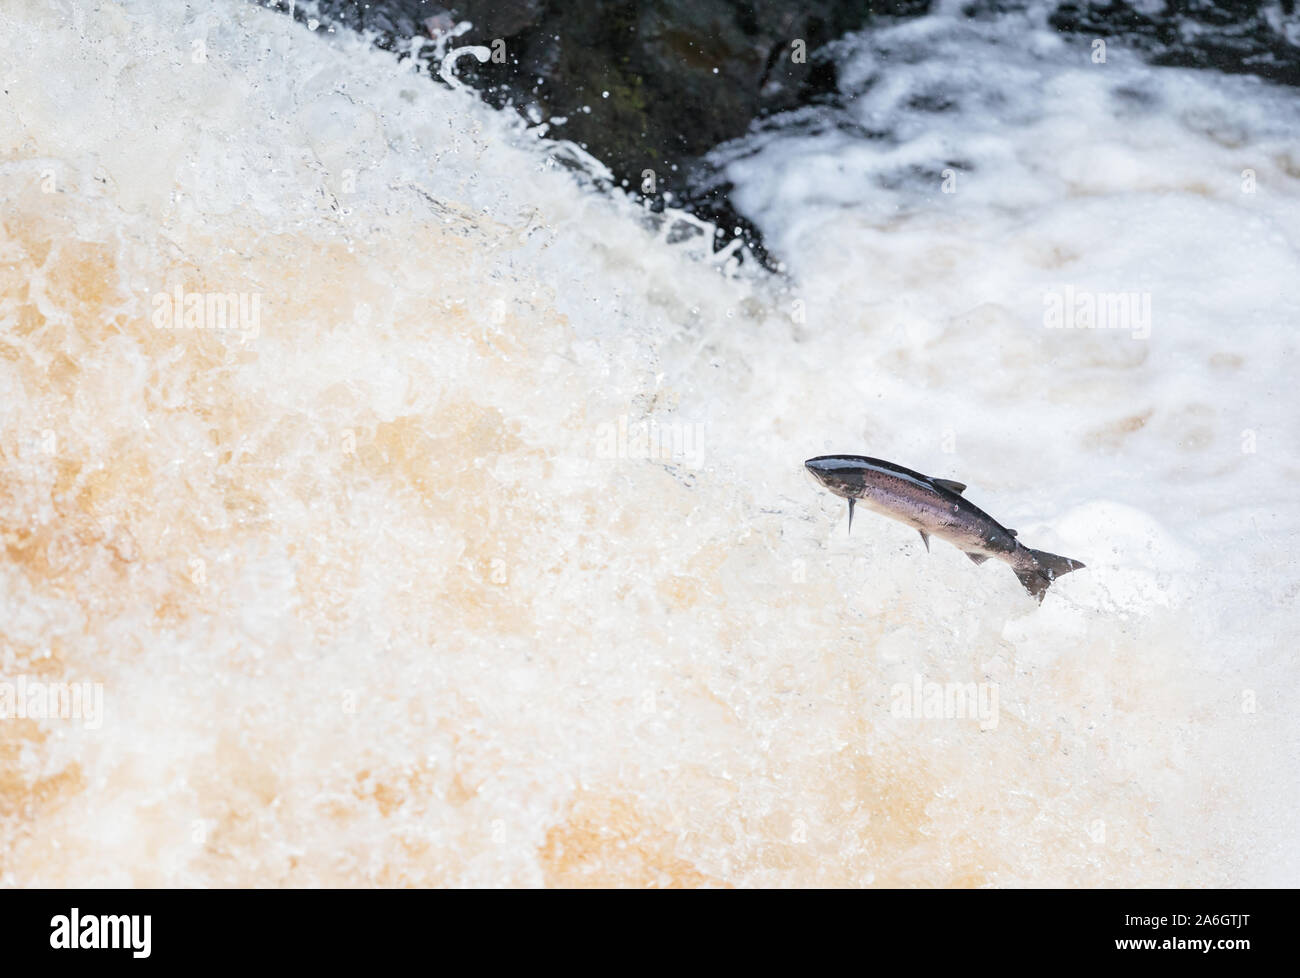 wild atlantic salmon leaping on a waterfall up to spawning grounds, a force  of nature and most amazing determination Stock Photo - Alamy